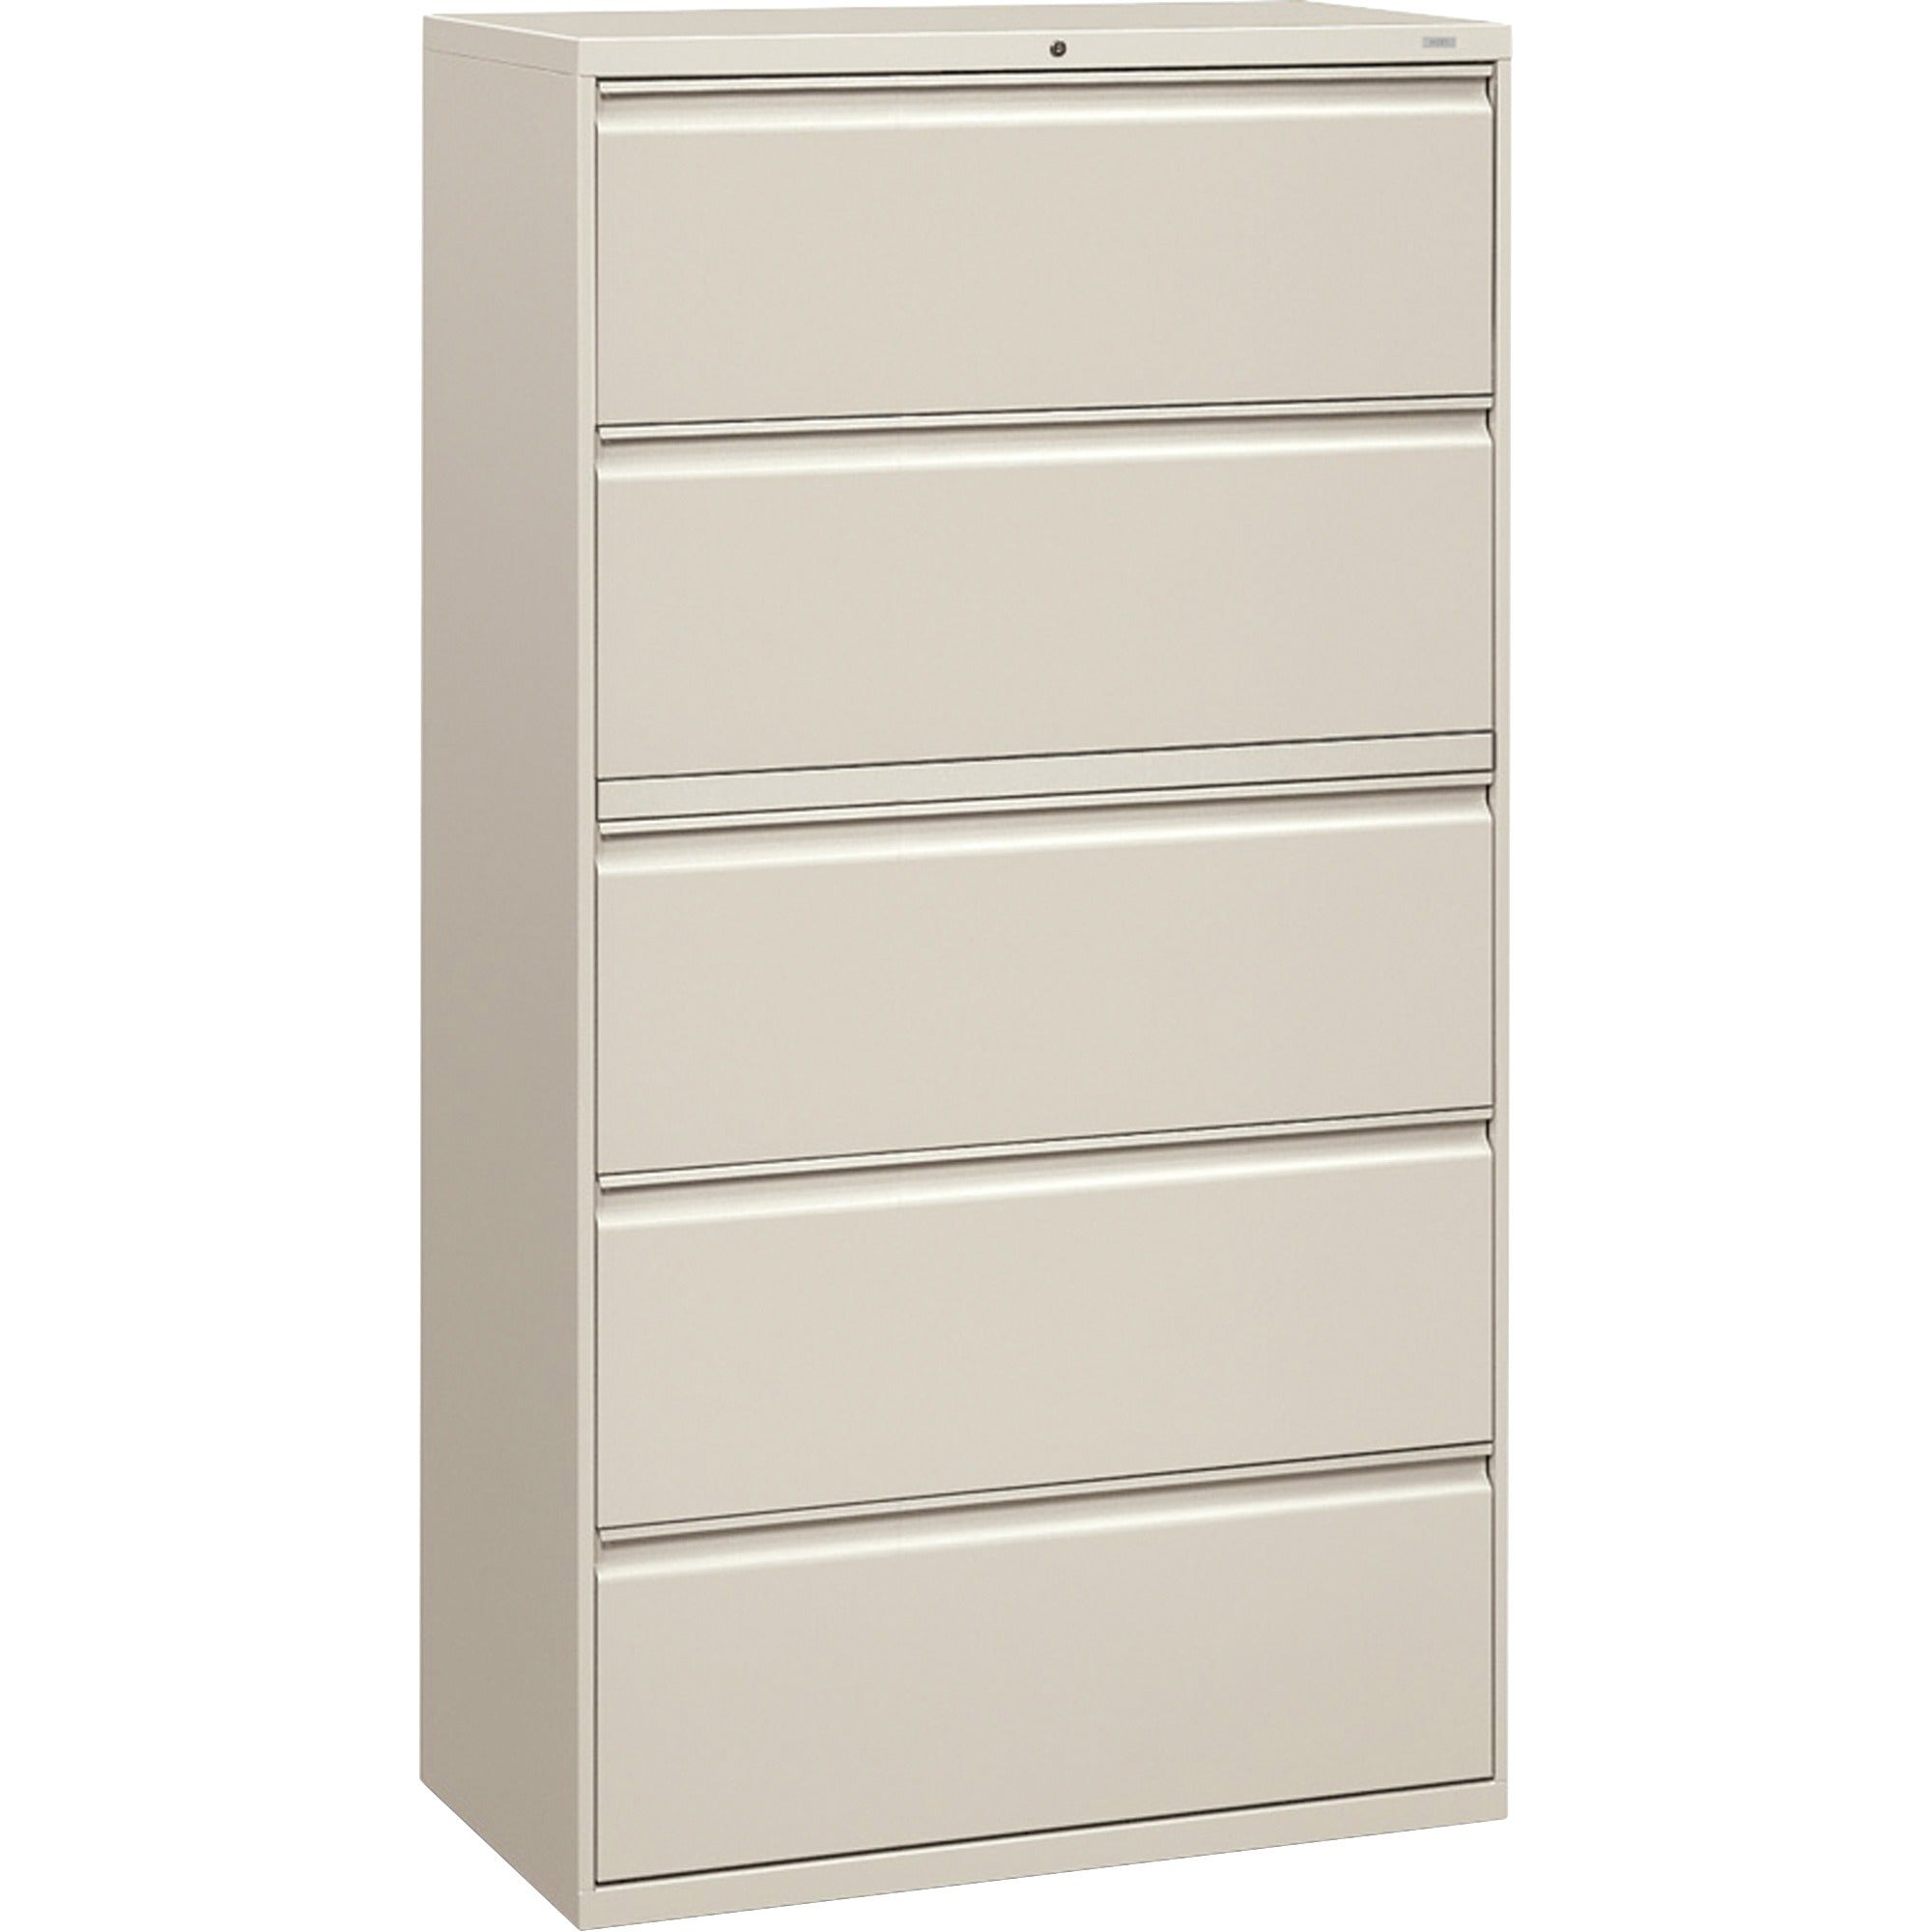 HON Brigade 800 H885 Lateral File - 36" x 18"67" - 5 Drawer(s) - Finish: Light Gray - 